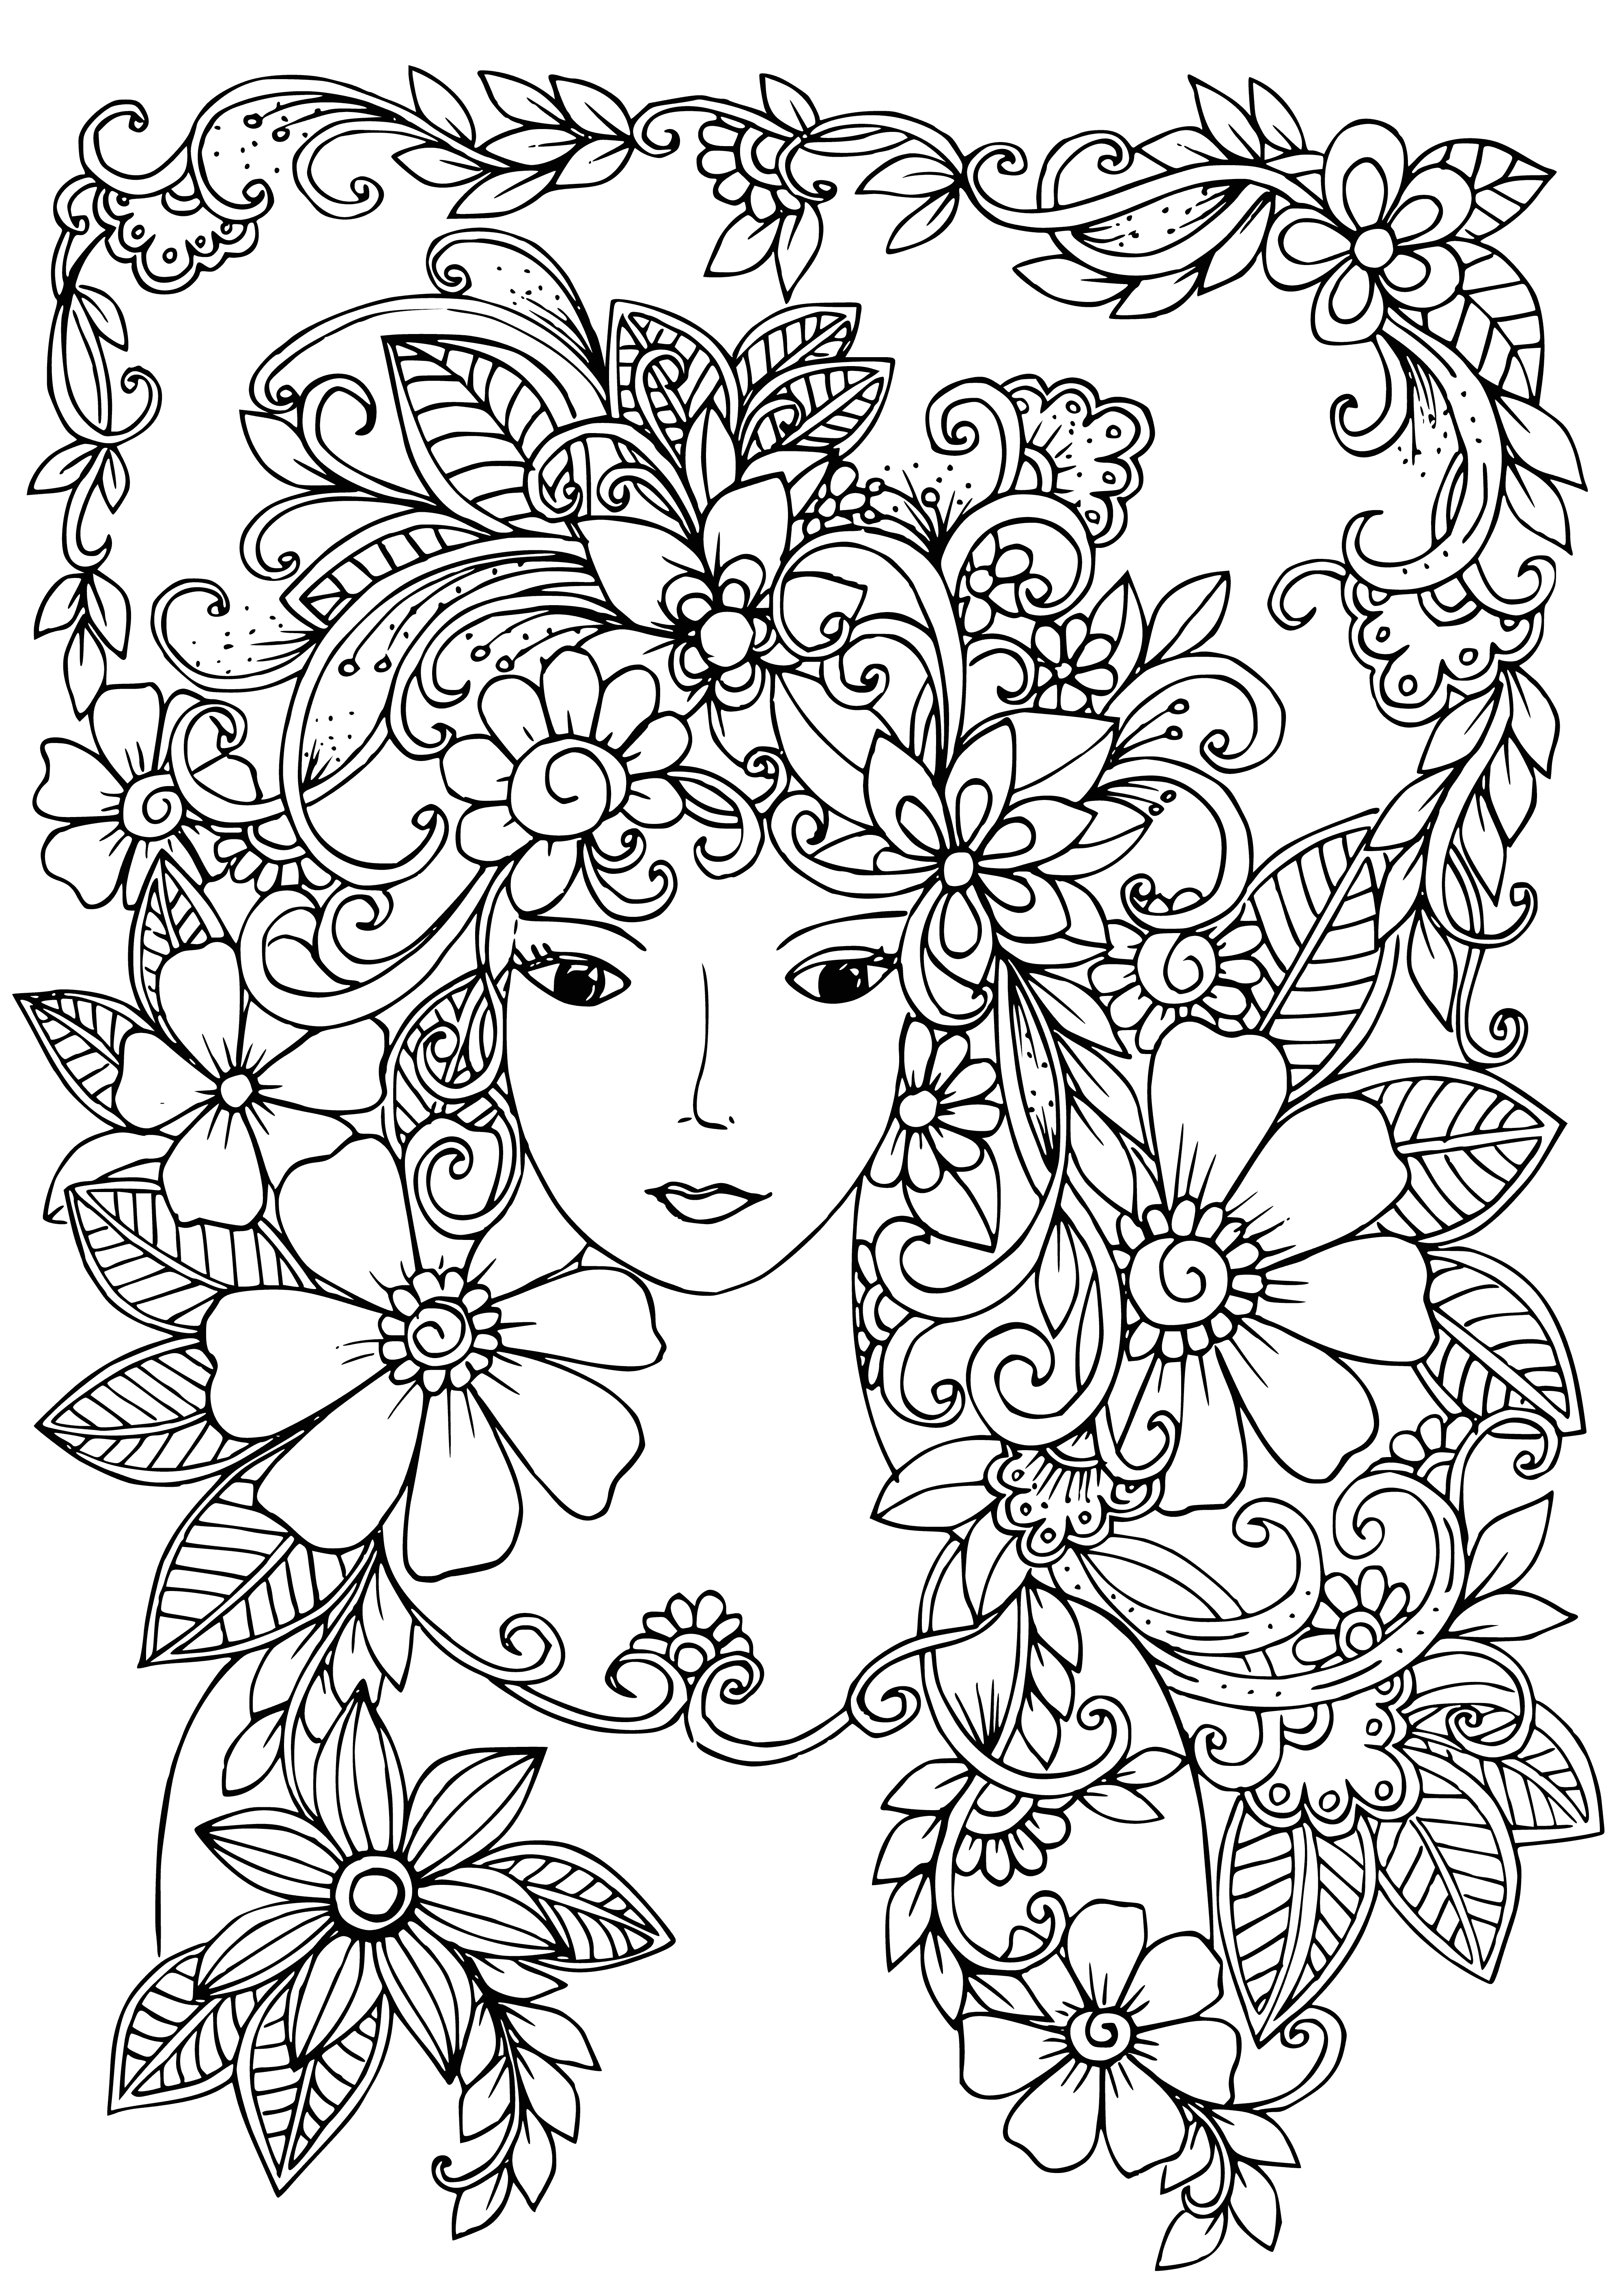 Girl in flowers coloring page